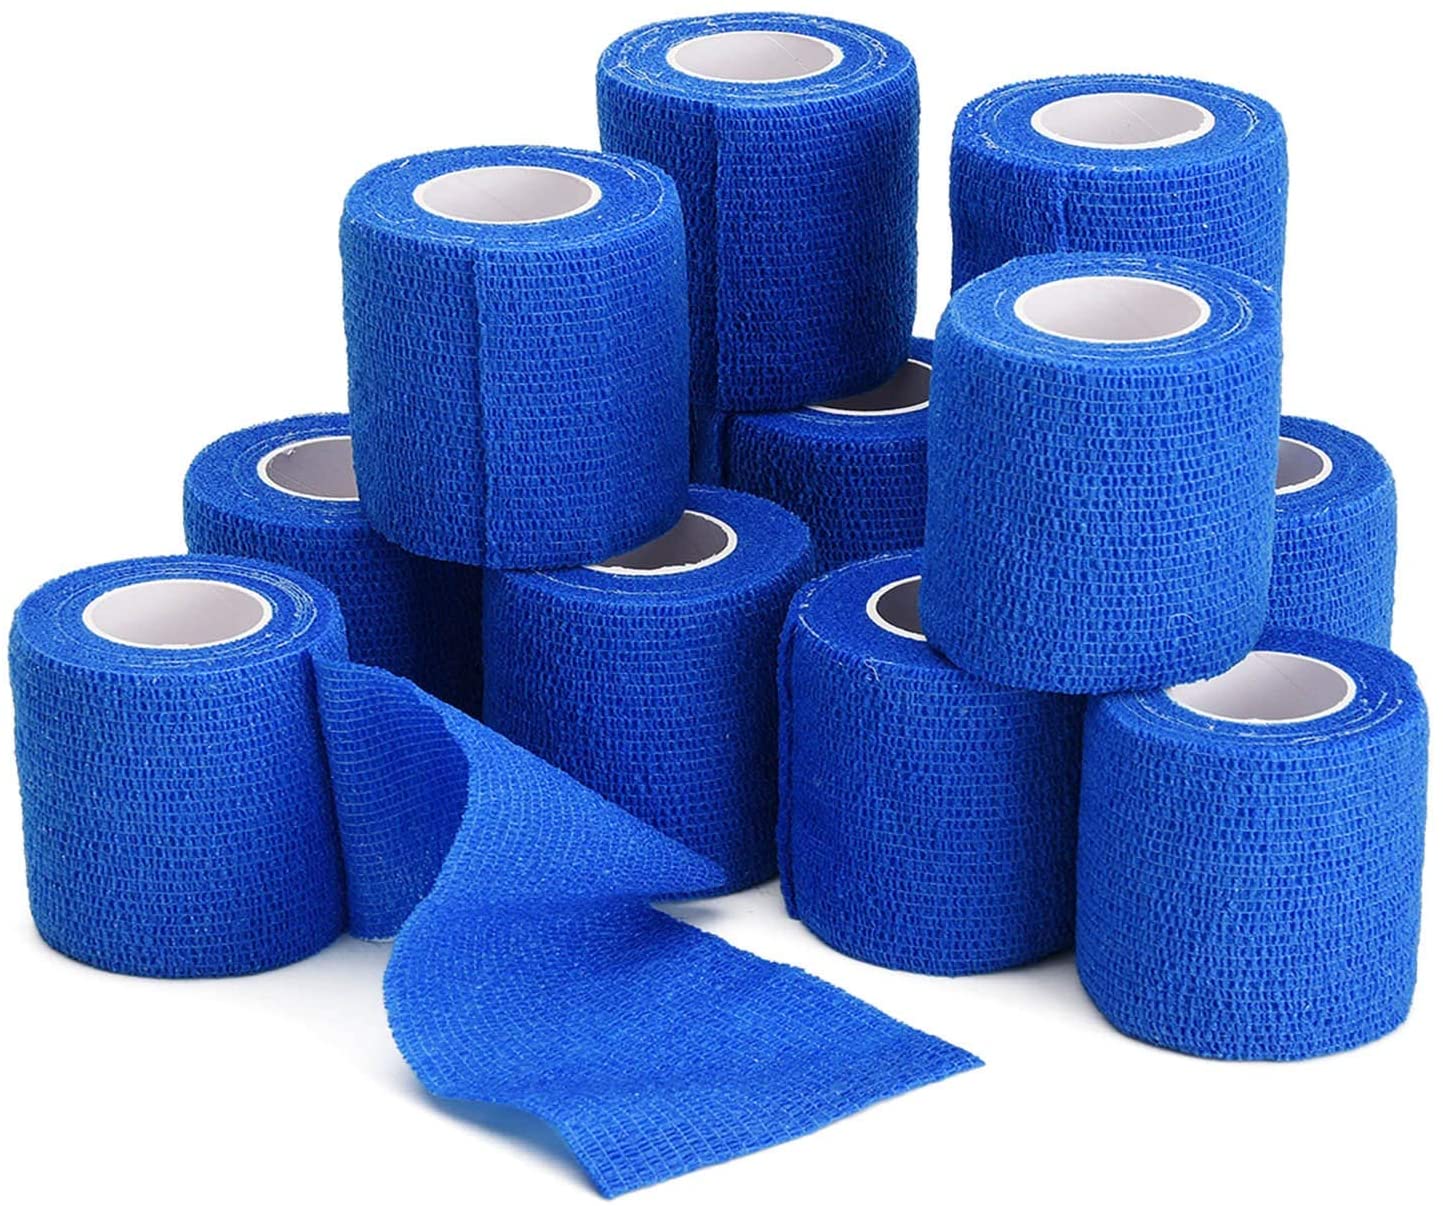 Waterproof Non Woven Adhesive First Aid Sports Cohesive Bandage